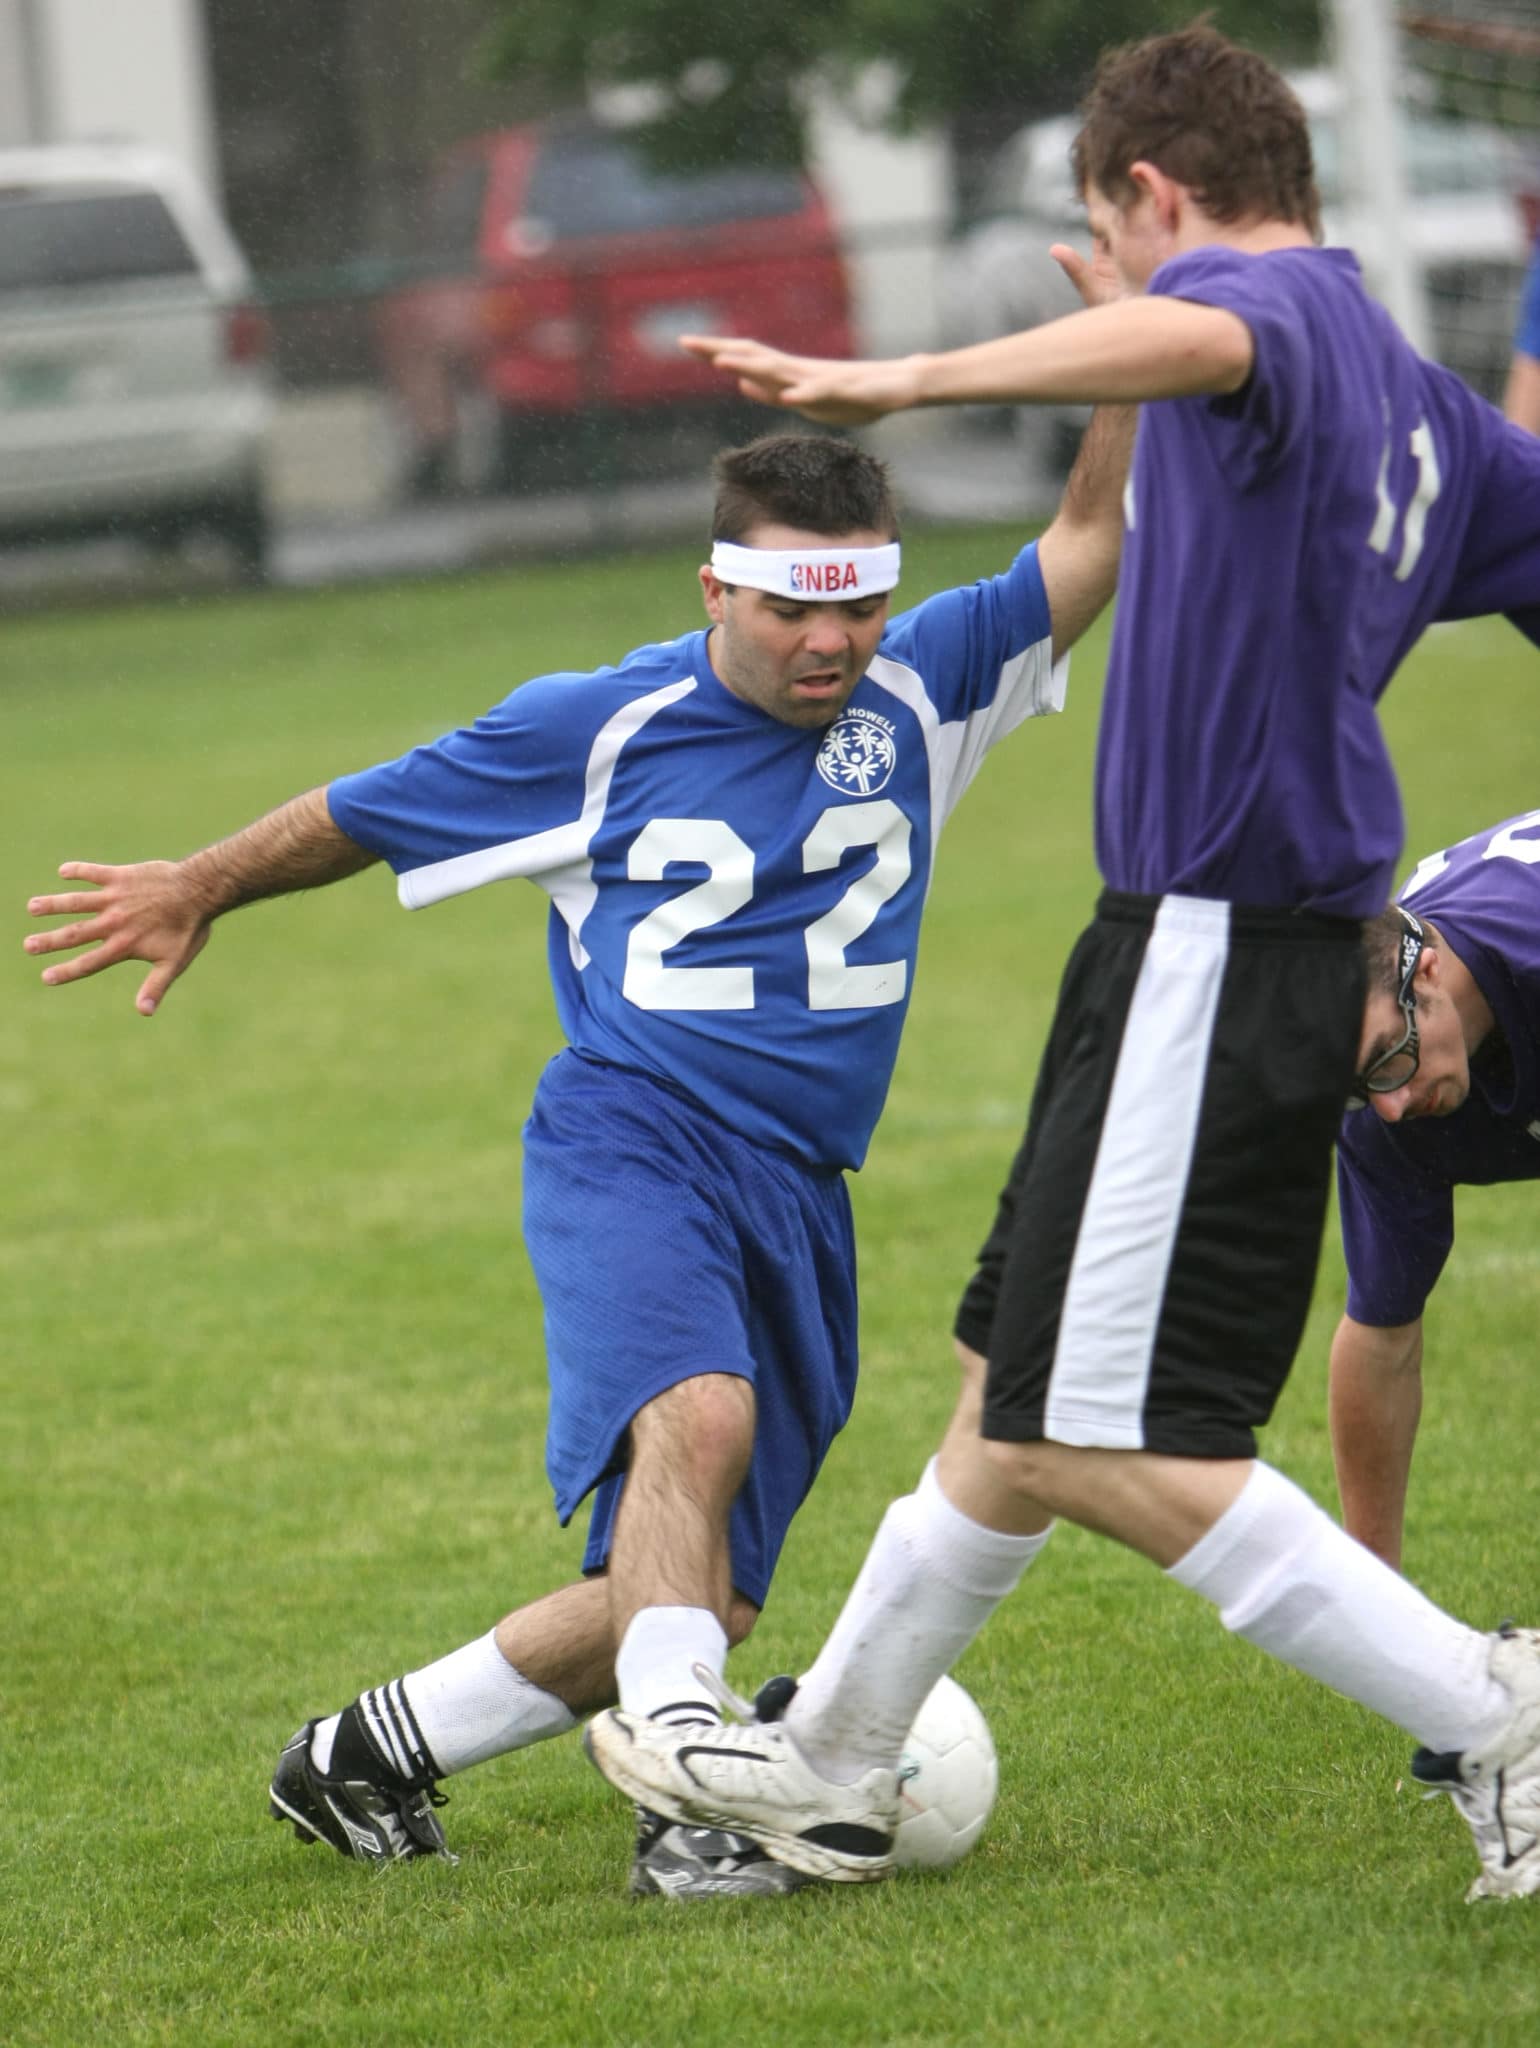 Francis Howell's Zack Nevels goes for the ball during a soccer game for the Special Olympics at Missouri State University

Amber Arnold/News-Leader